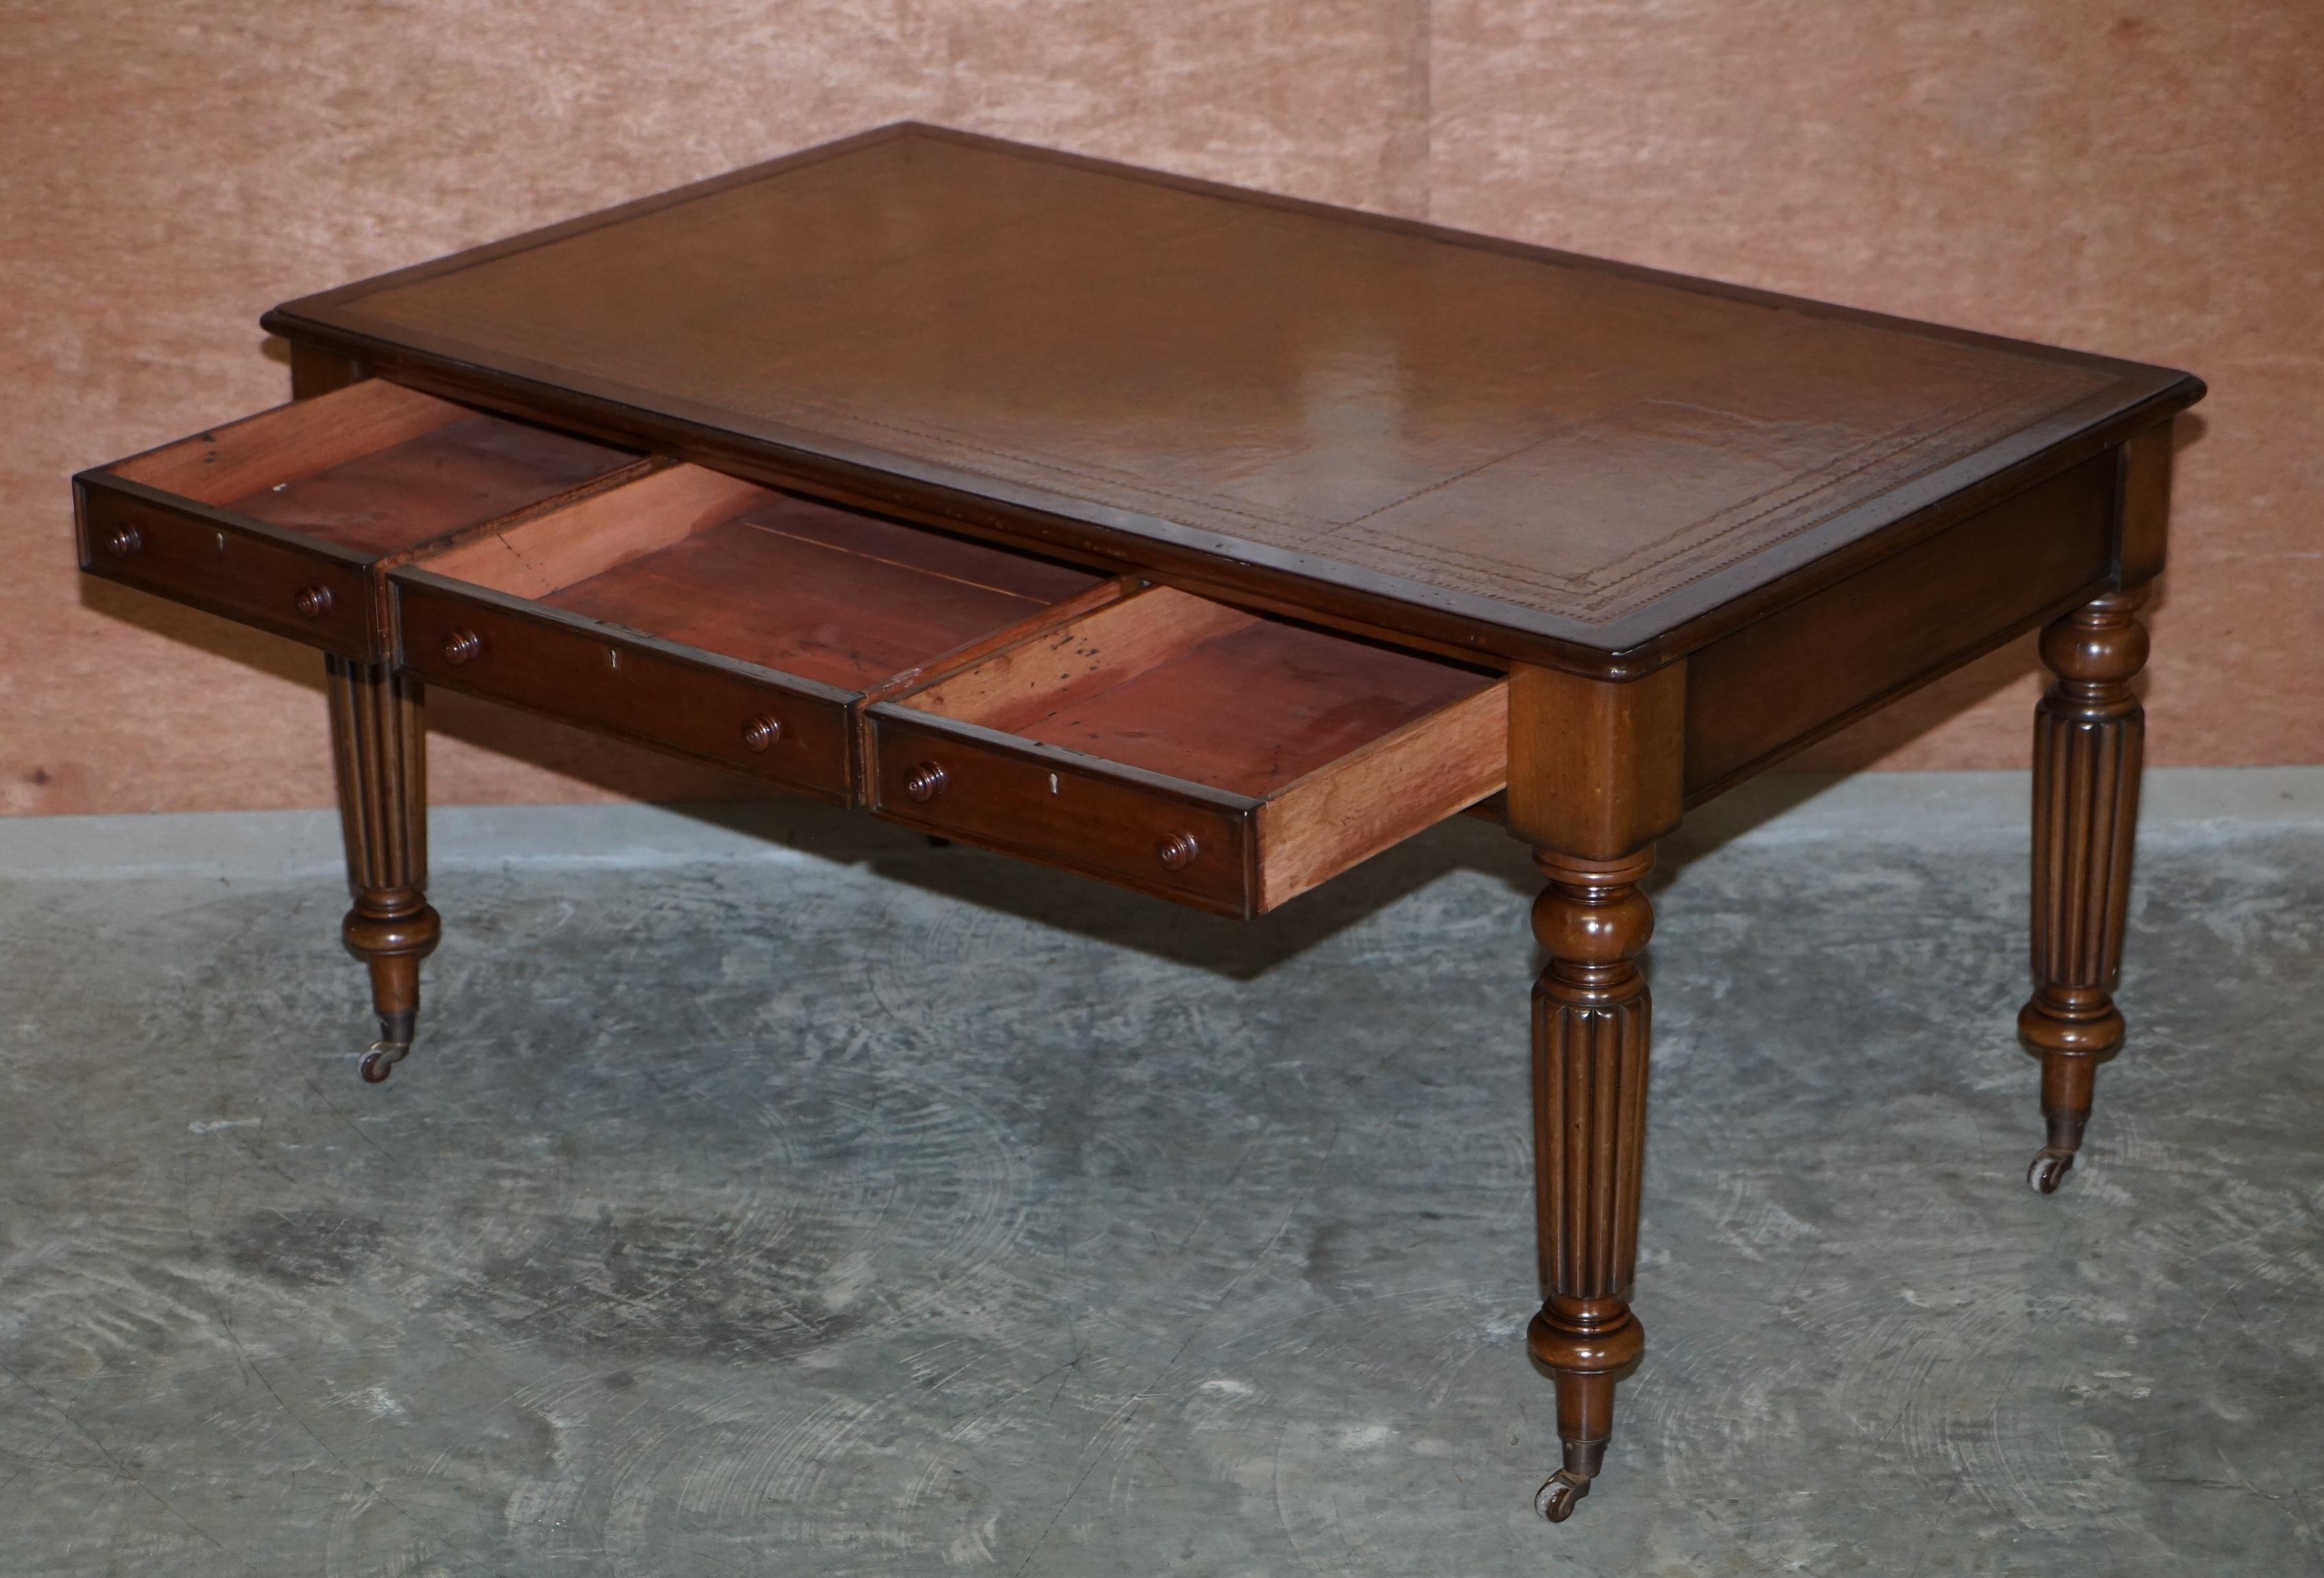 Restored Victorian Library Writing Table or Desk Brown Leather Top Gillows Legs 12